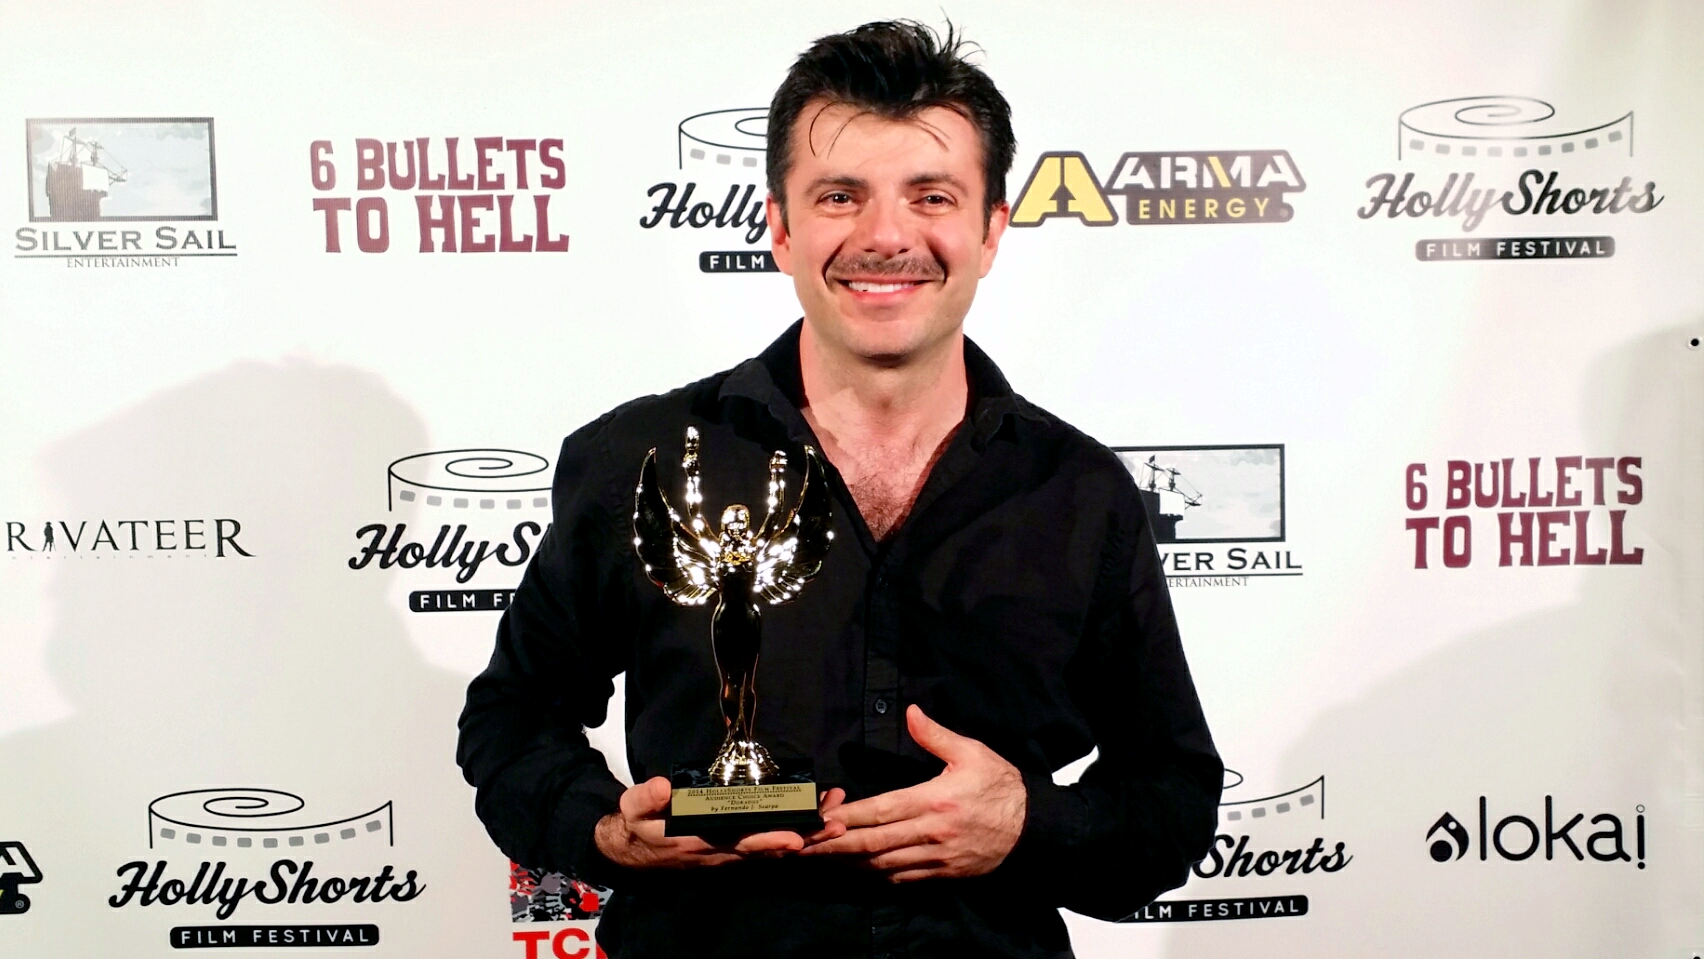 Fernando receiving the AUDIENCE AWARD at the Chinese Theater in Hollywood for 'Doradus'. Hollyshorts Film Festival winner 2014